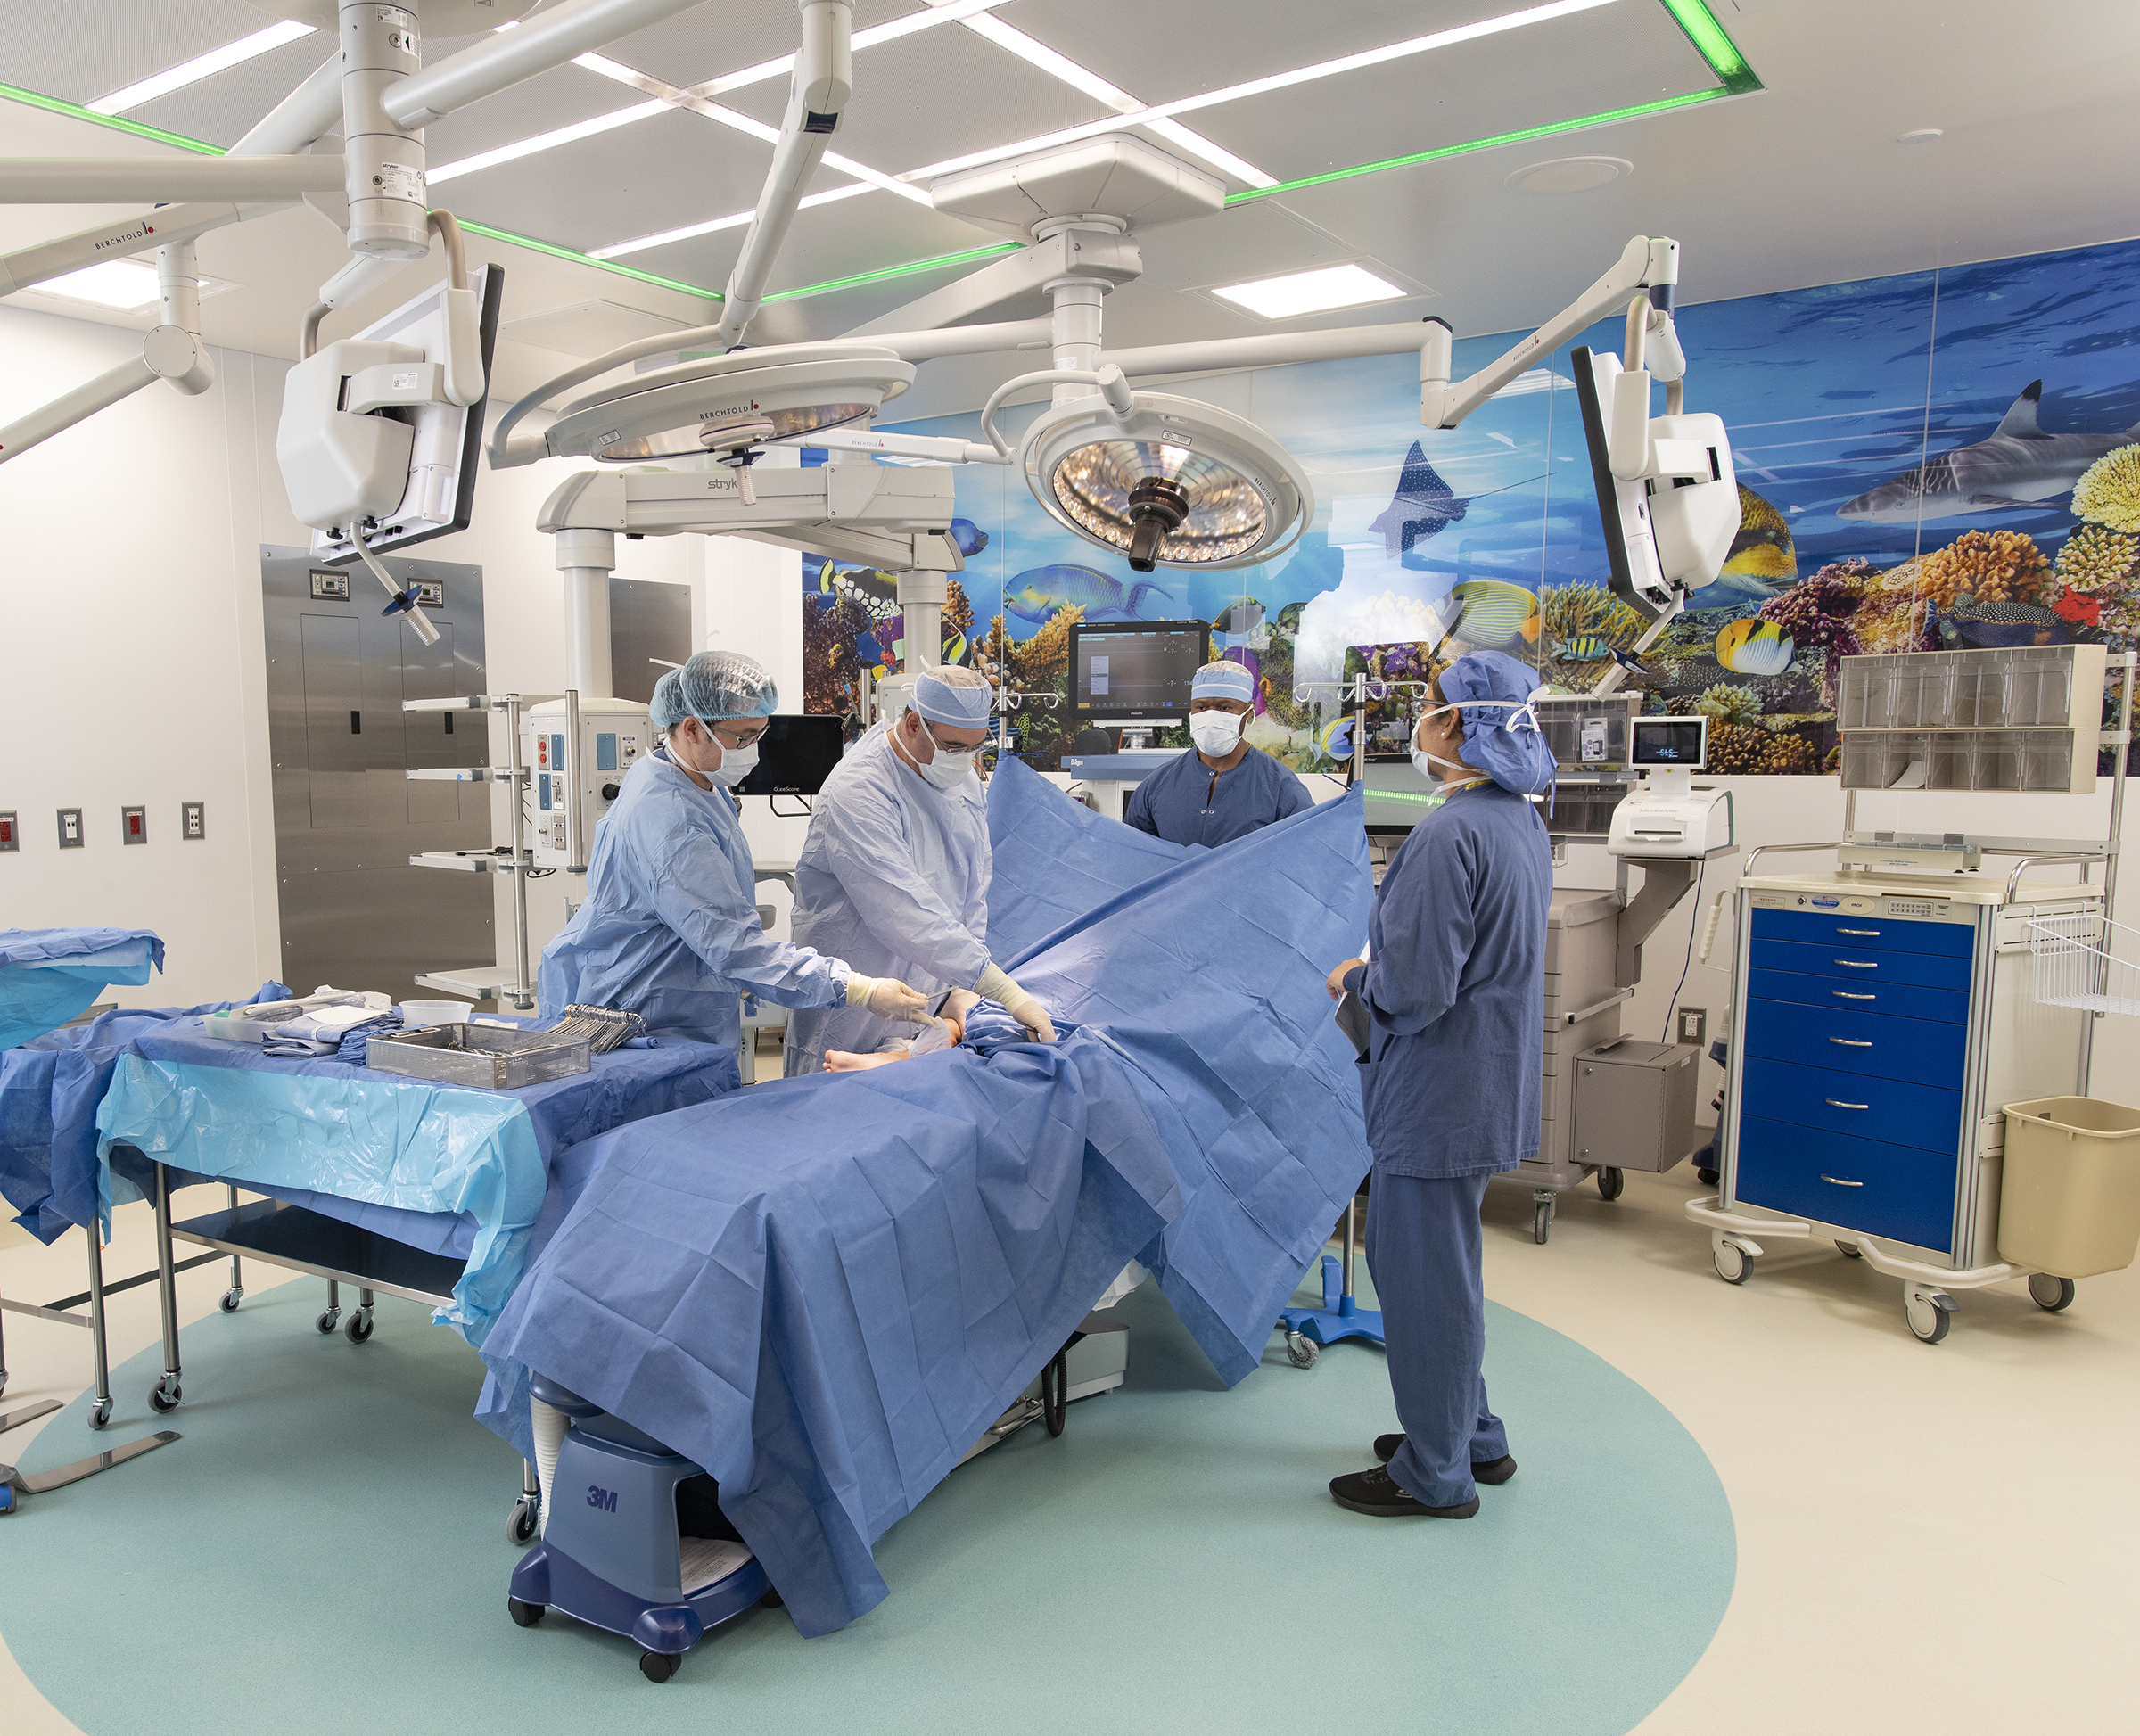 At Cohen Children’s, a new $110M operating complex